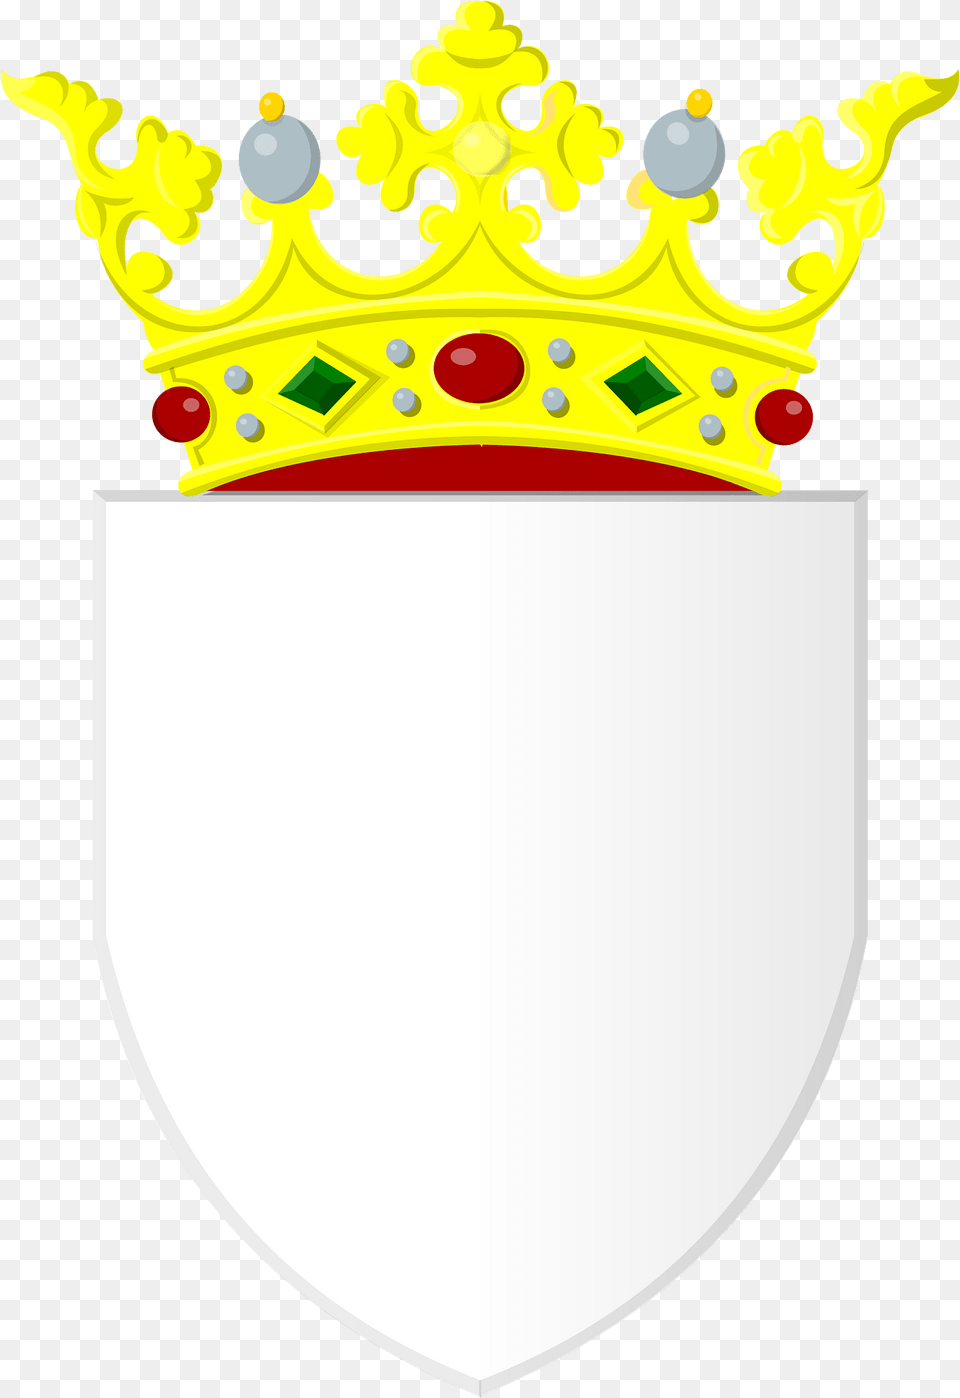 Silver Shield With Golden Crown 3 Clipart, Accessories, Jewelry Free Png